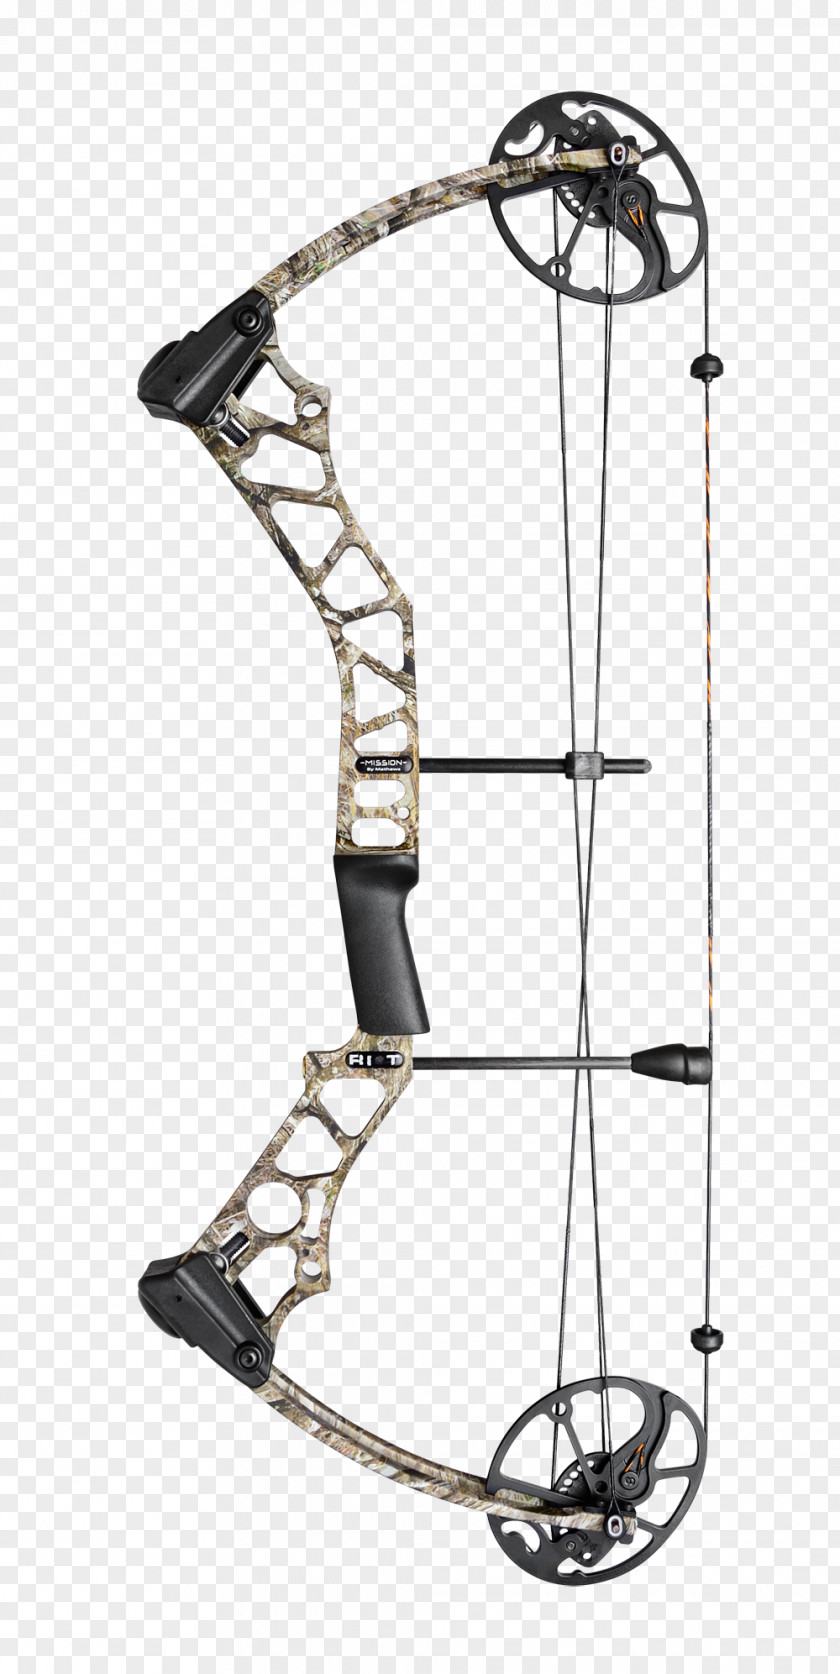 Flare Bow And Arrow Archery Compound Bows Crossbow Bowhunting PNG